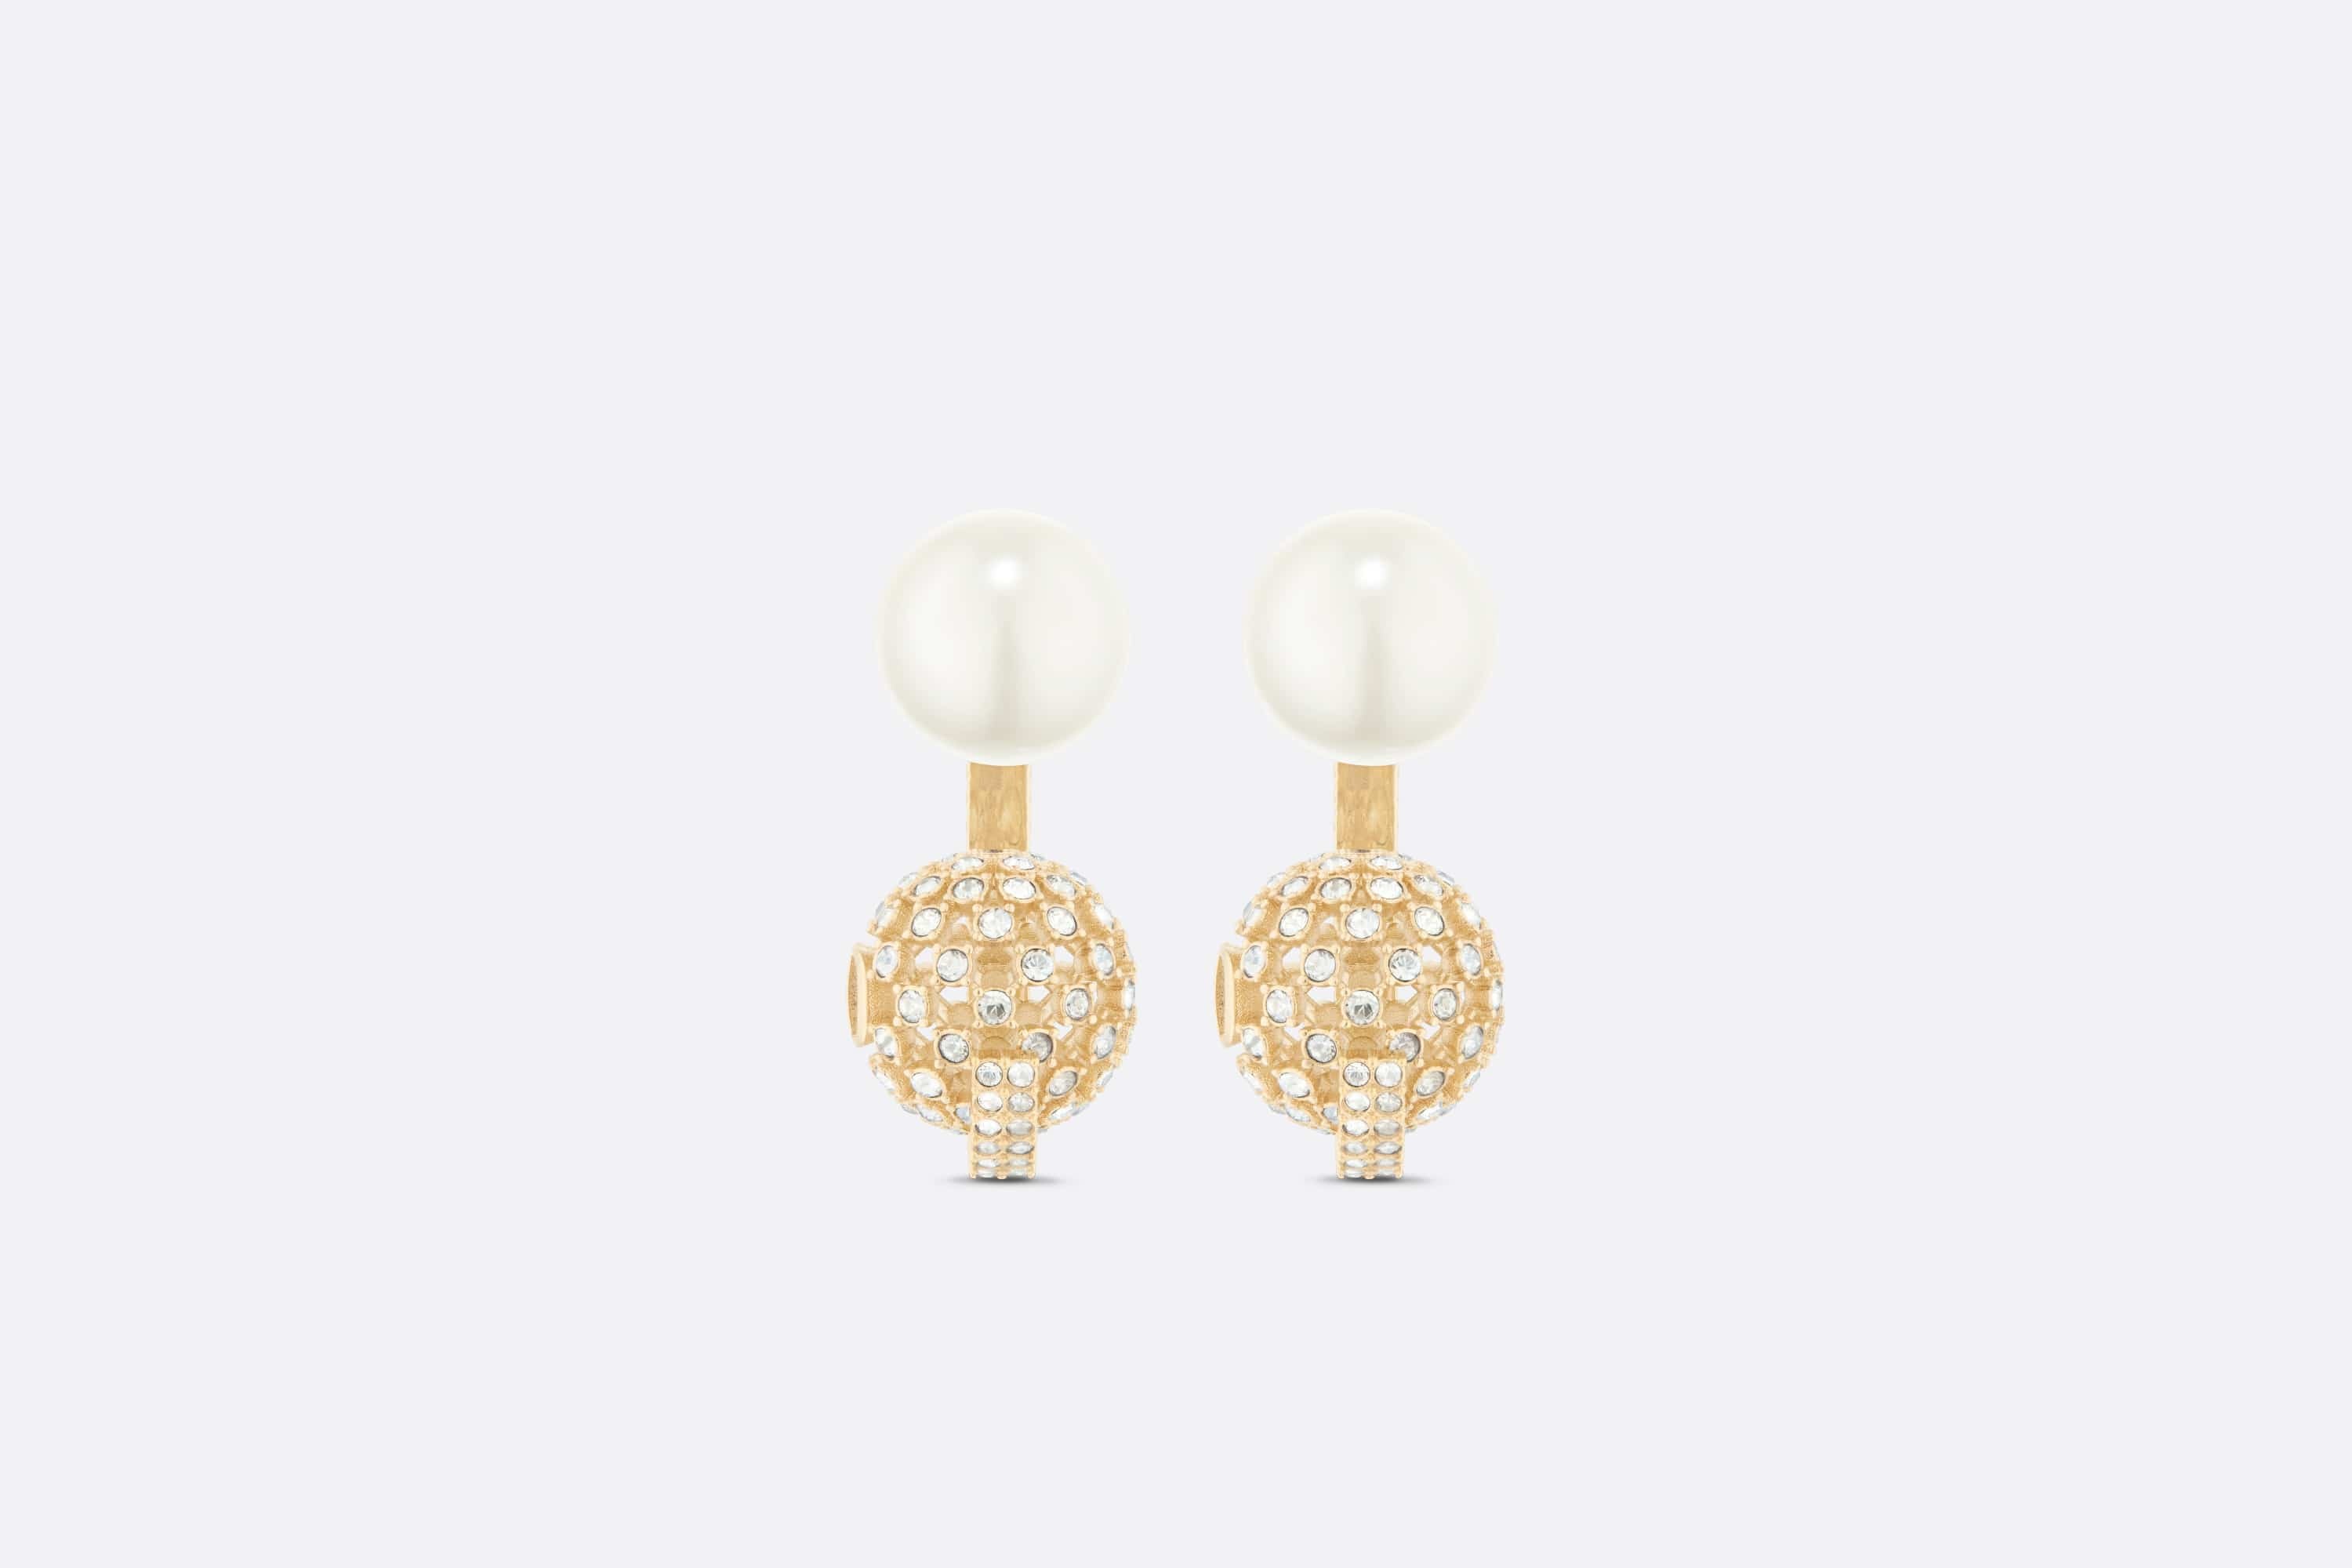 Dior Tribales Gemini Earring Gold-Finish Metal and a White Resin